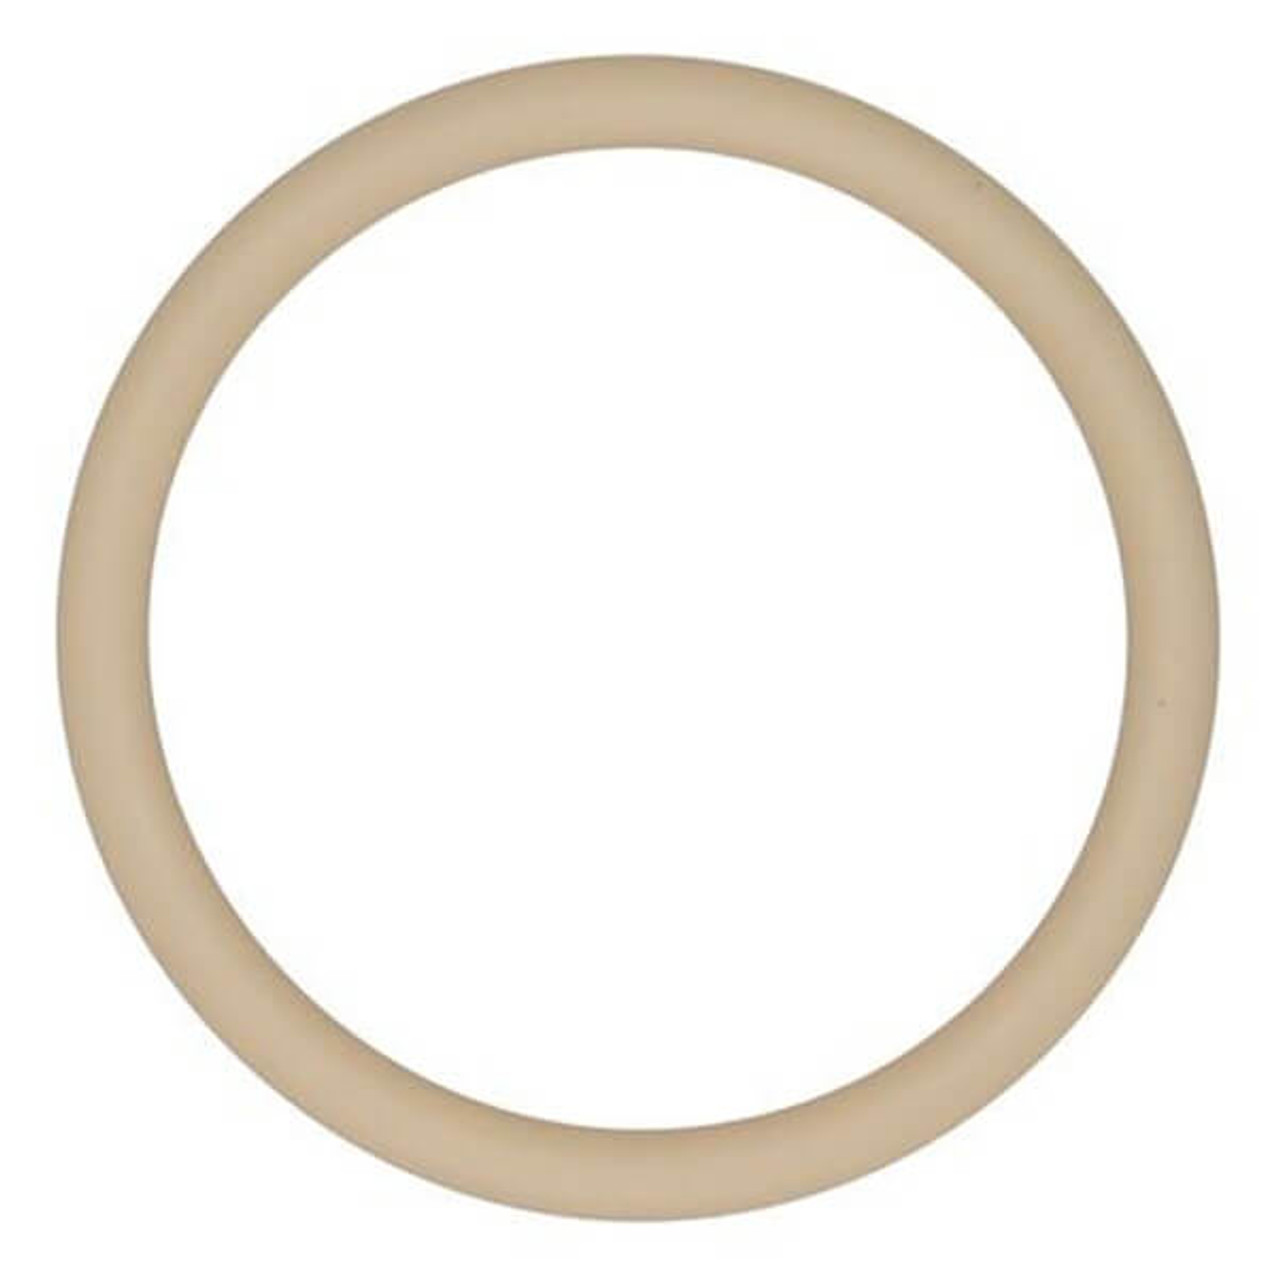 04-1371-58 Wilflex O-Ring for 1.5" Pumps